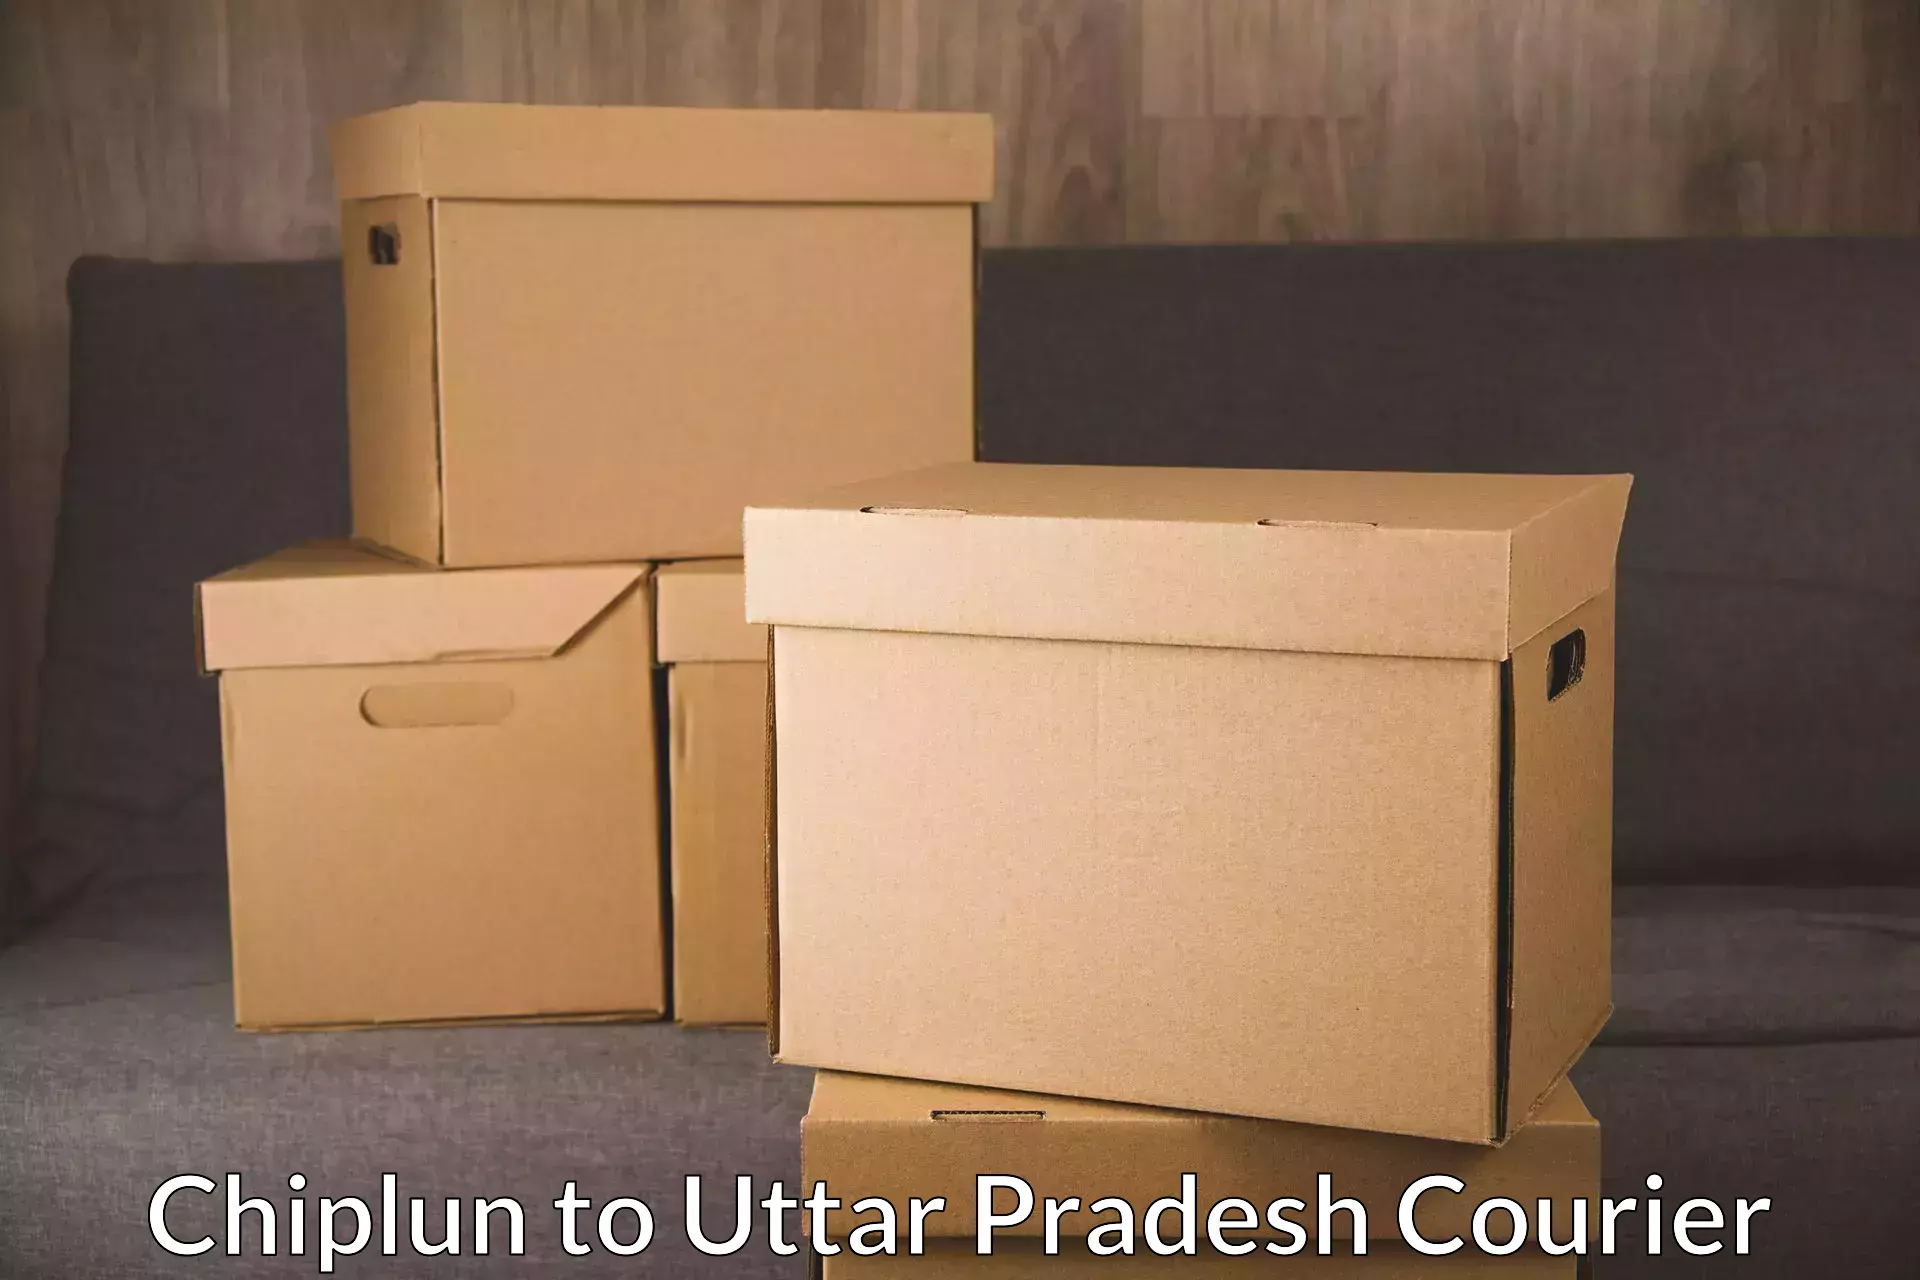 Package tracking Chiplun to Agra